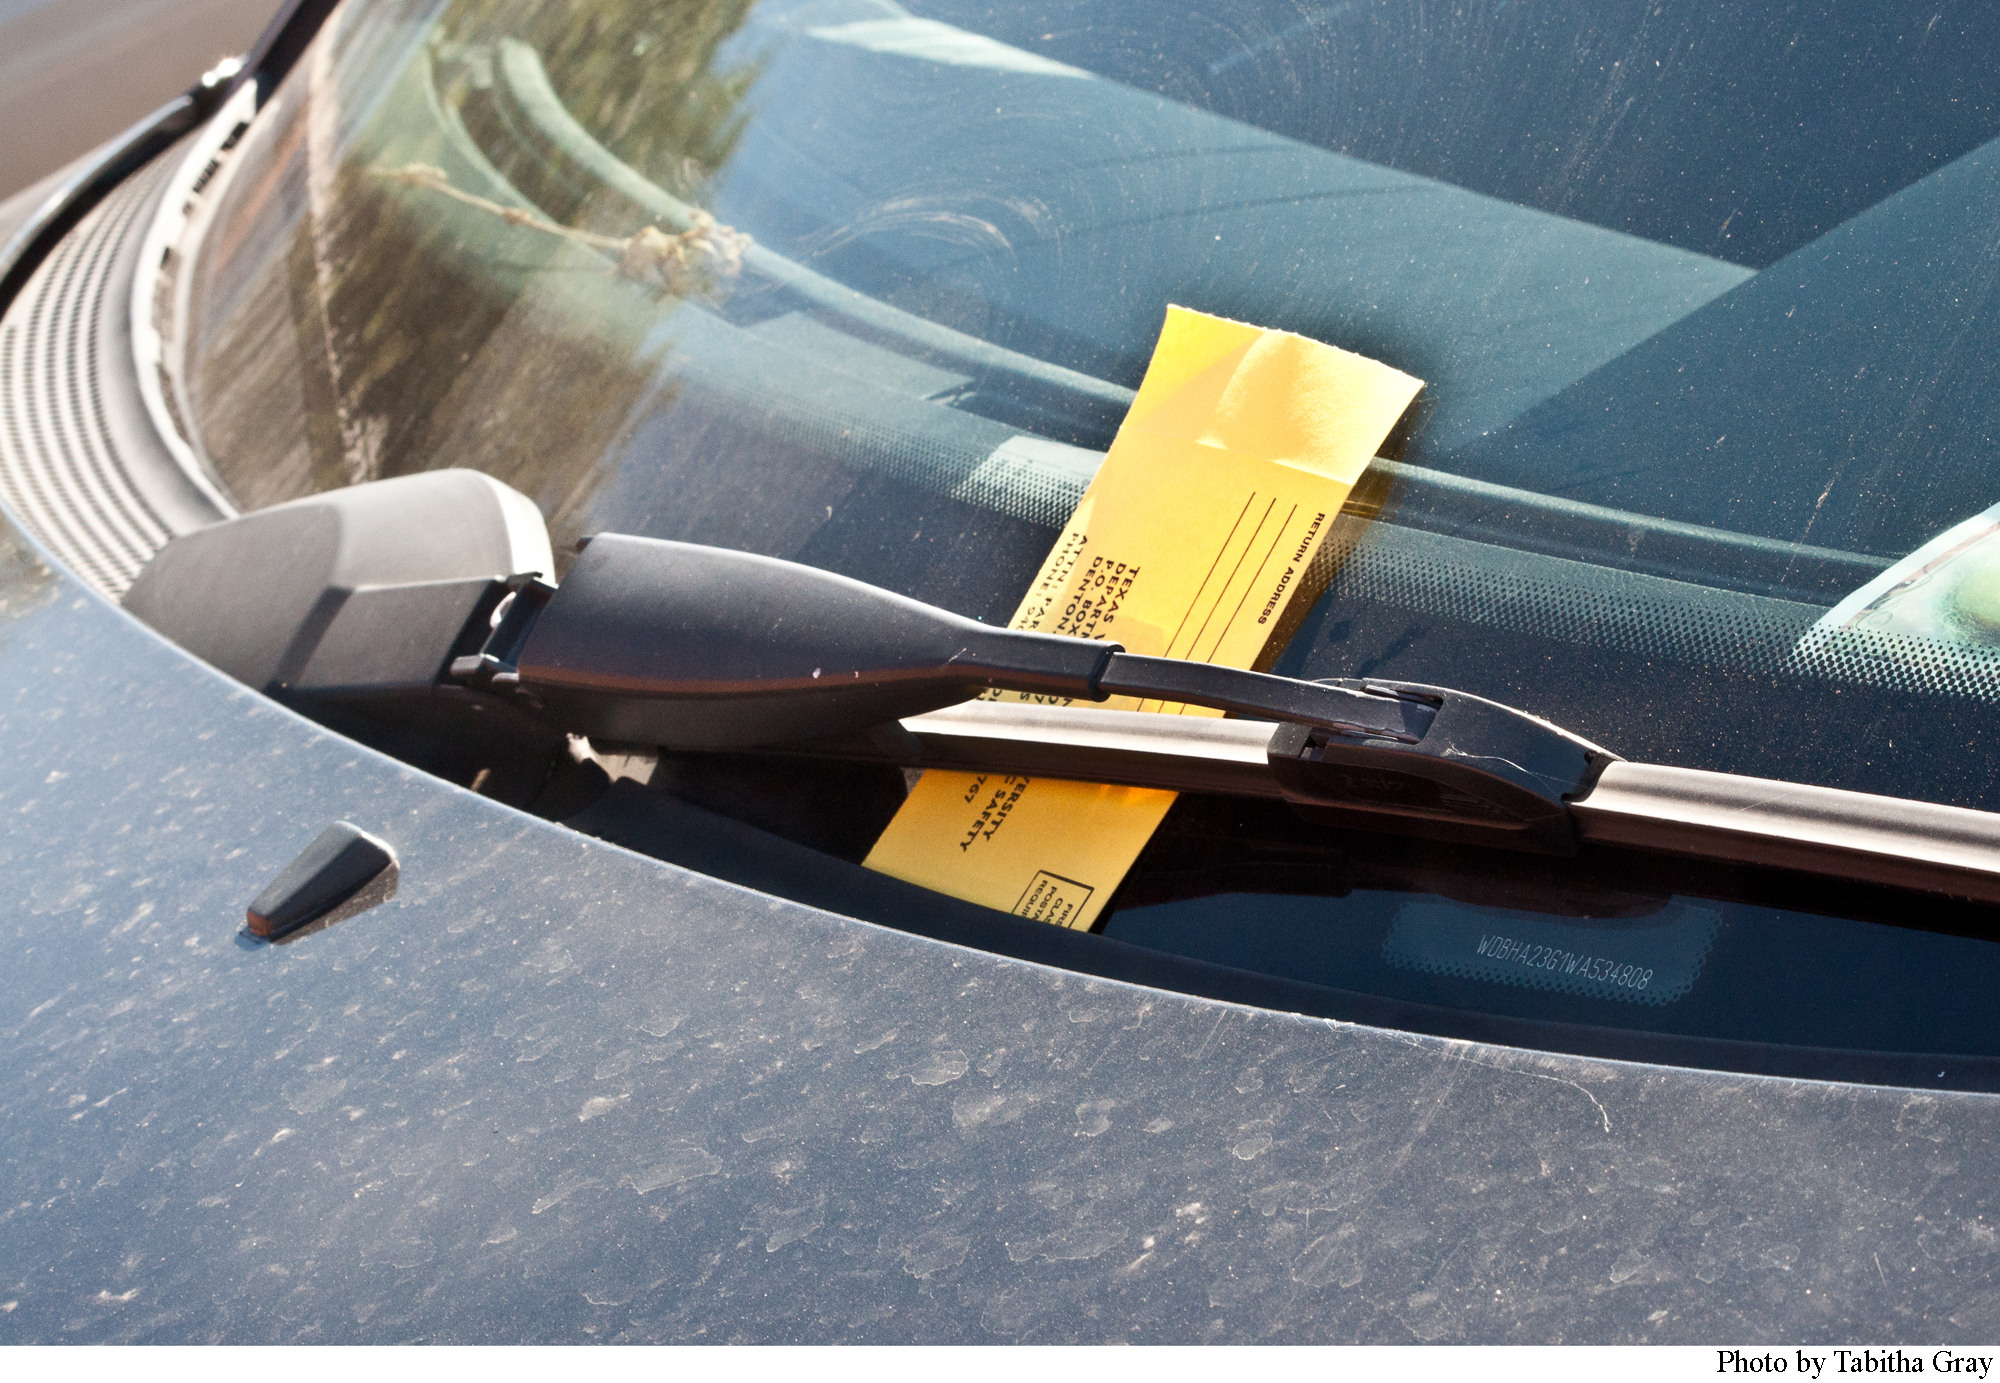 TWU Department of Public Safety regularly patrols campus parking lots ticketing illegally parked vehicles.